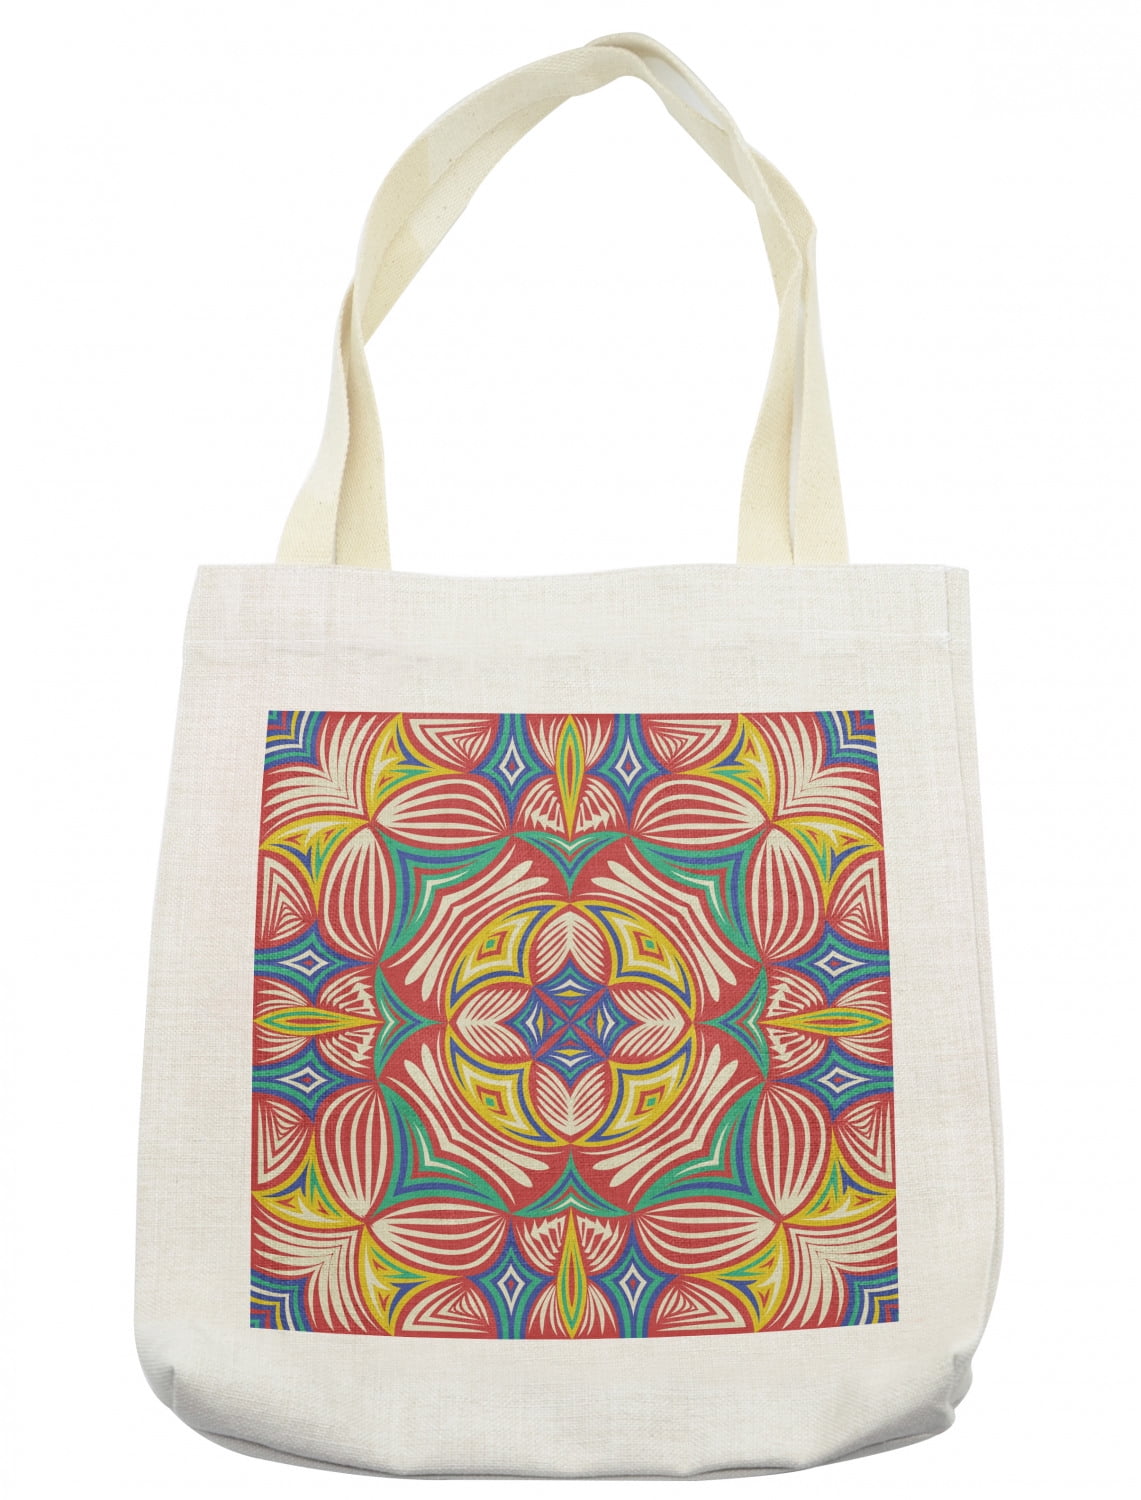 Colorful Tote Bag, Contemporary Style Abstract Shapes Native Design ...